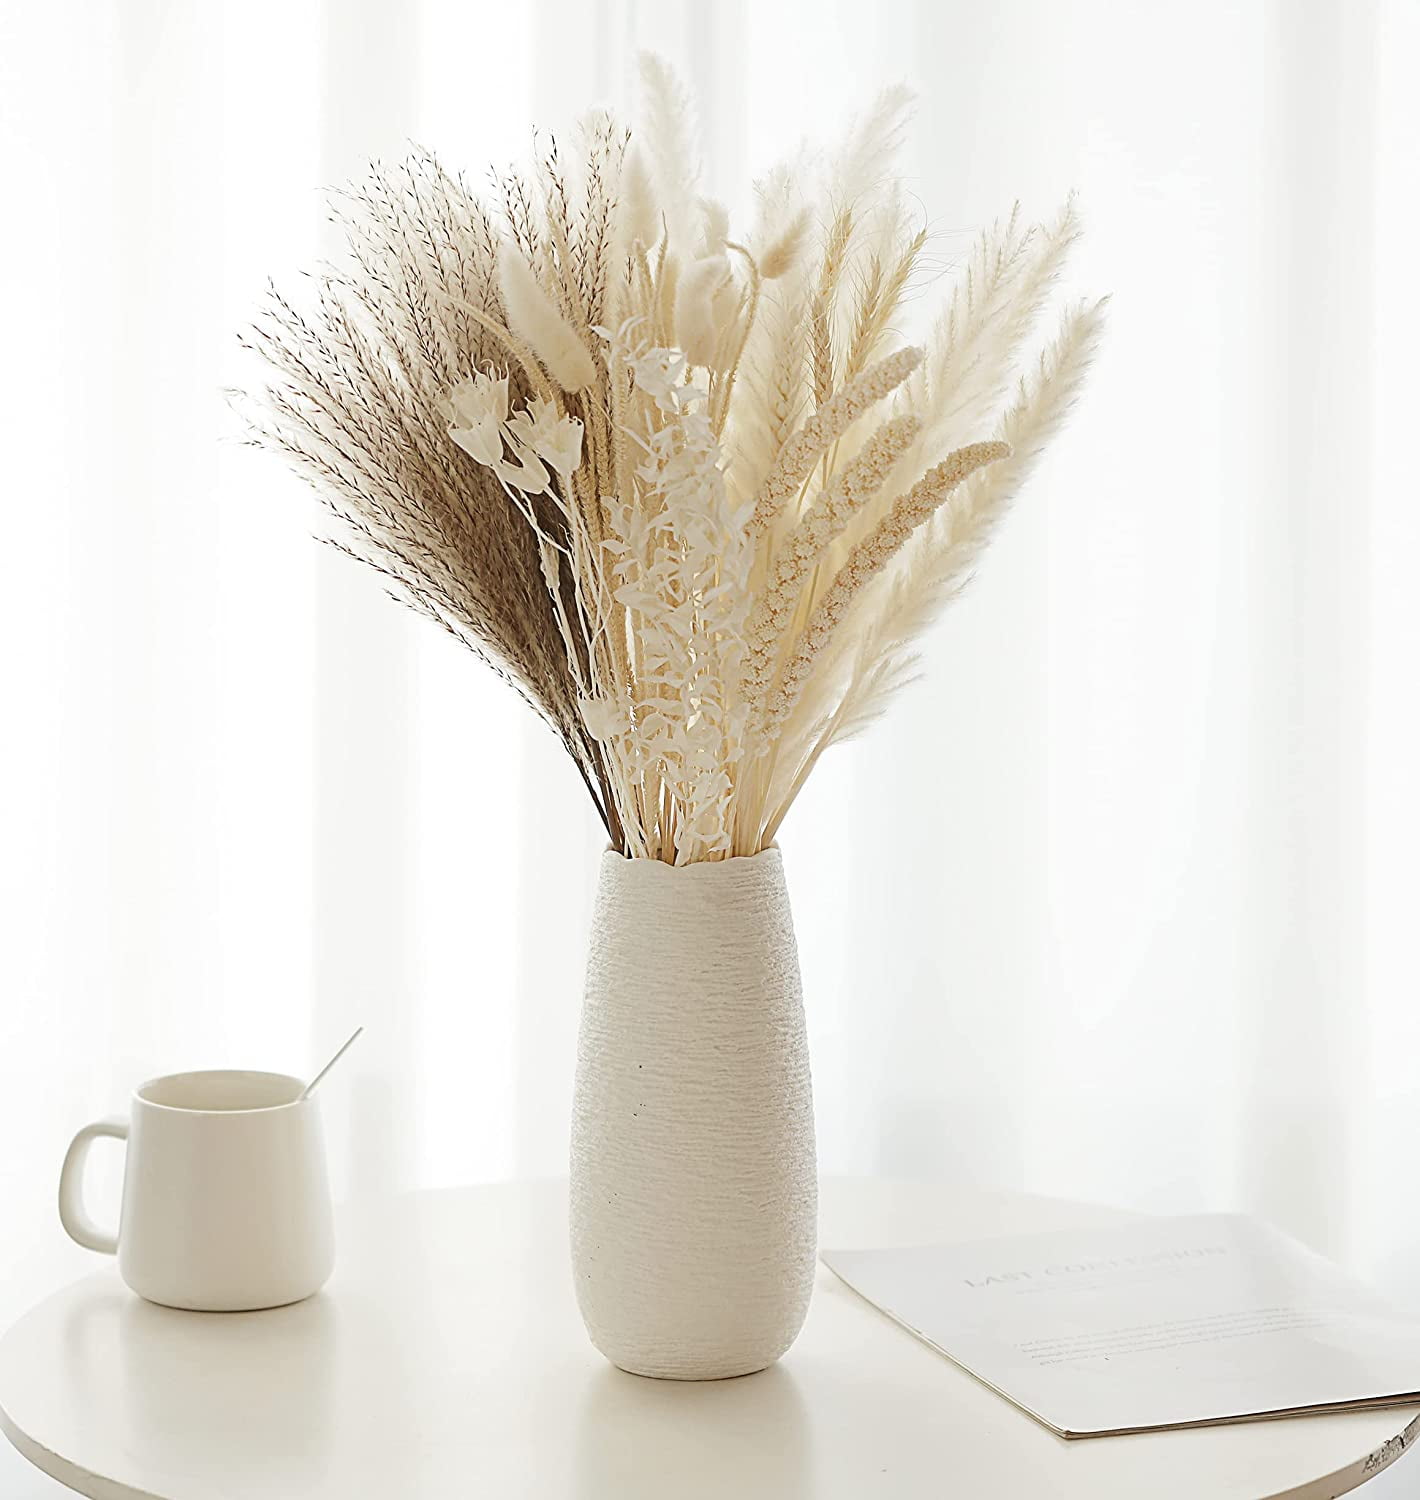 95pcs Natural Dried Pampas Grass Bouquet 17.5 Inches, Reed Flower, Gold Ball, Luxury Pampas, Valentine Grass, White Pampas Bunny Tail, Artificial